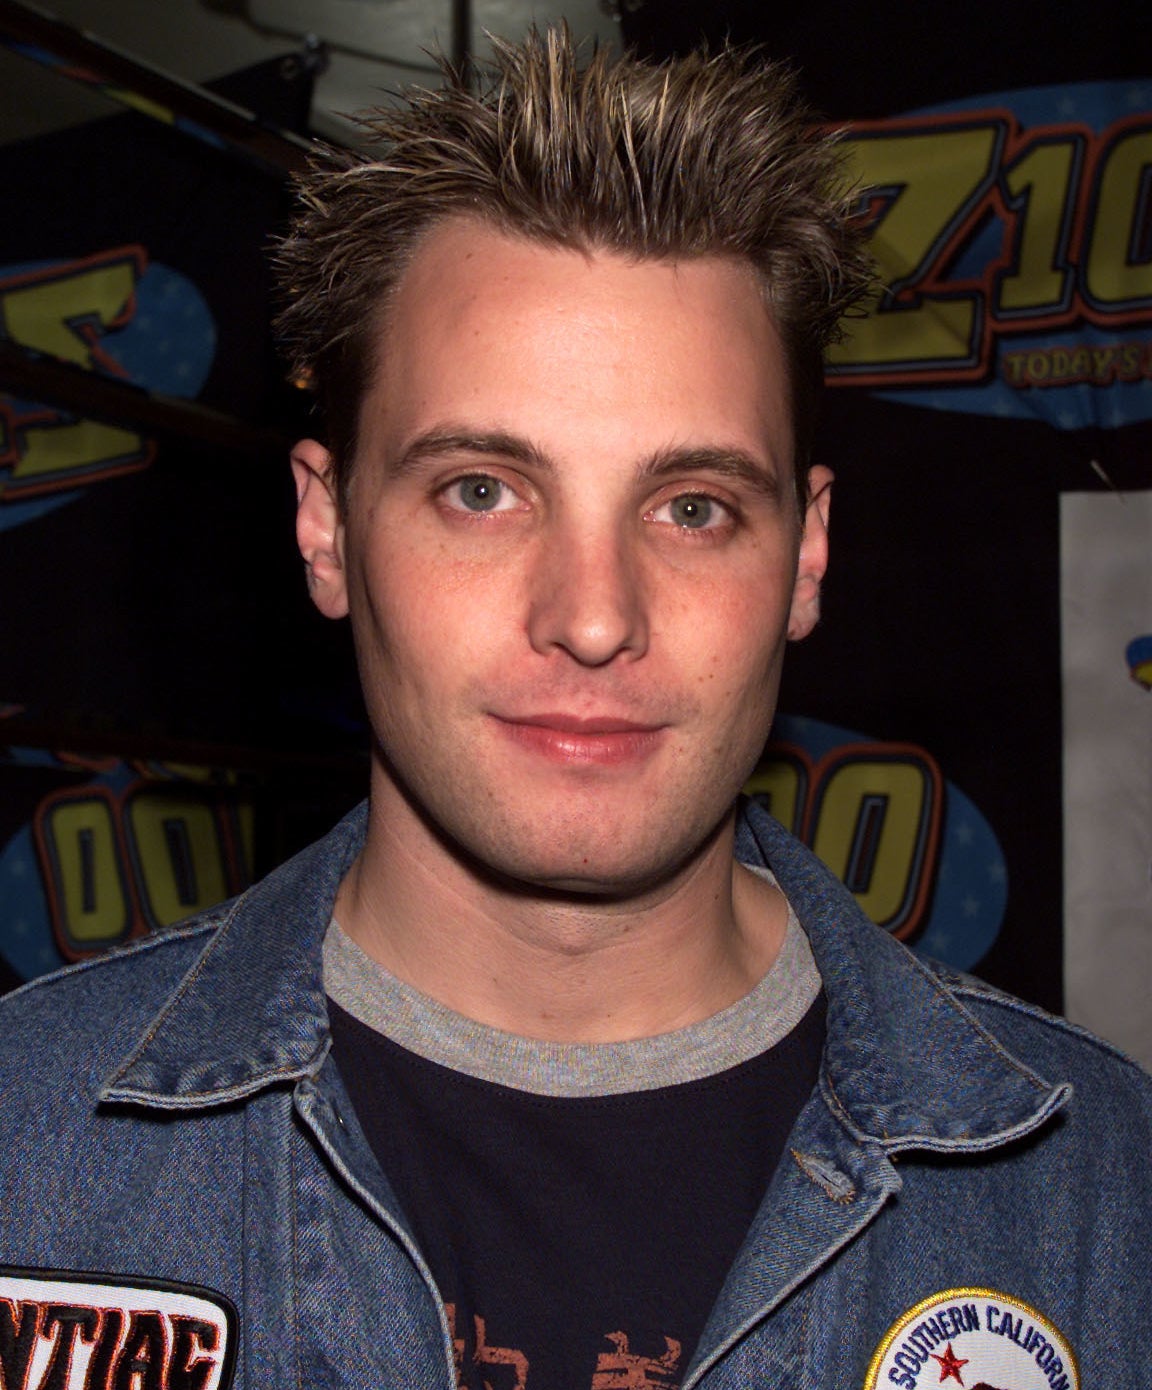 A close-up shot of Rich with frosted tips at Z-100 event in the early 2000s